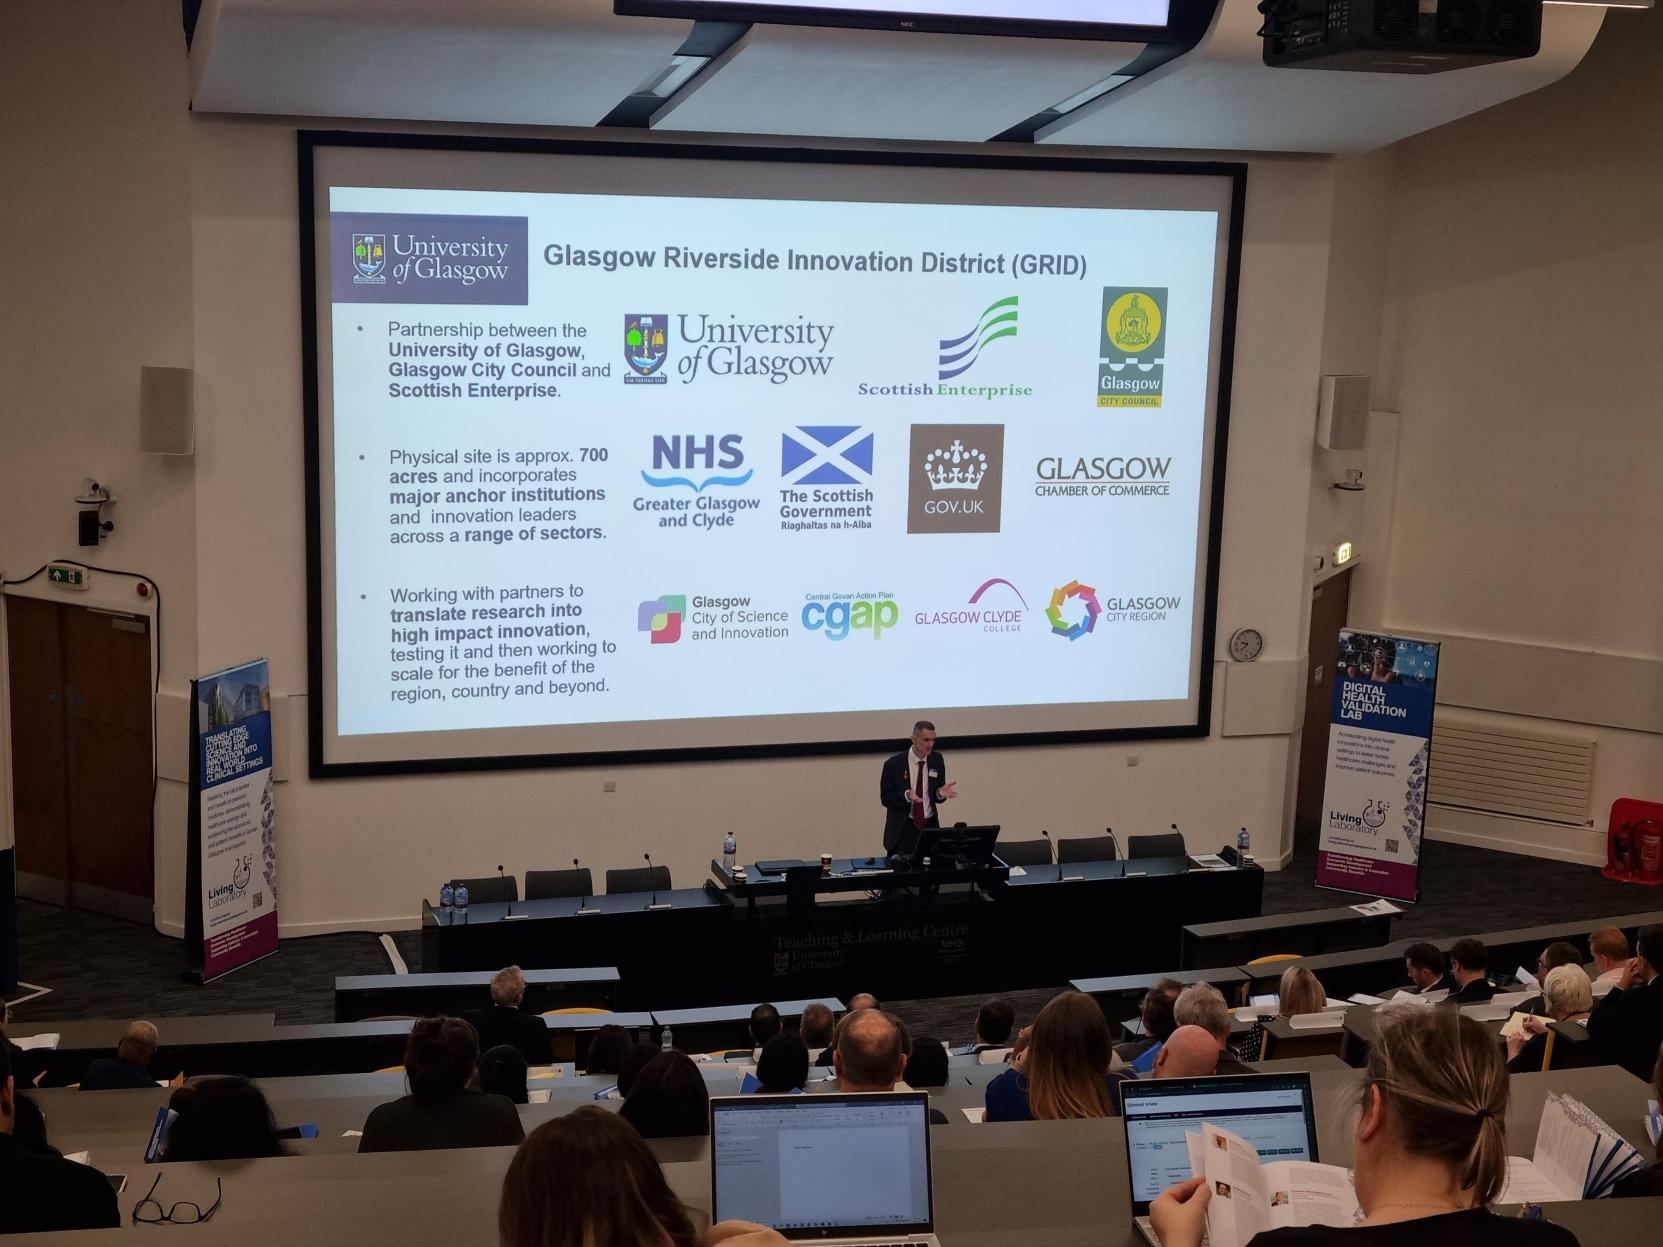 Mike King delivers talk on GRID in front of screen showcasing the partnership between UofG, Scottish Enterprise, Glasgow City Council, NHS GG&C, The Scottish Government, GOV.UK, Glasgow City of Commerce, Glasgow City of Science and Innovation, Central Govan Action Plan, Glasgow Clyde College and Glasgow City Region